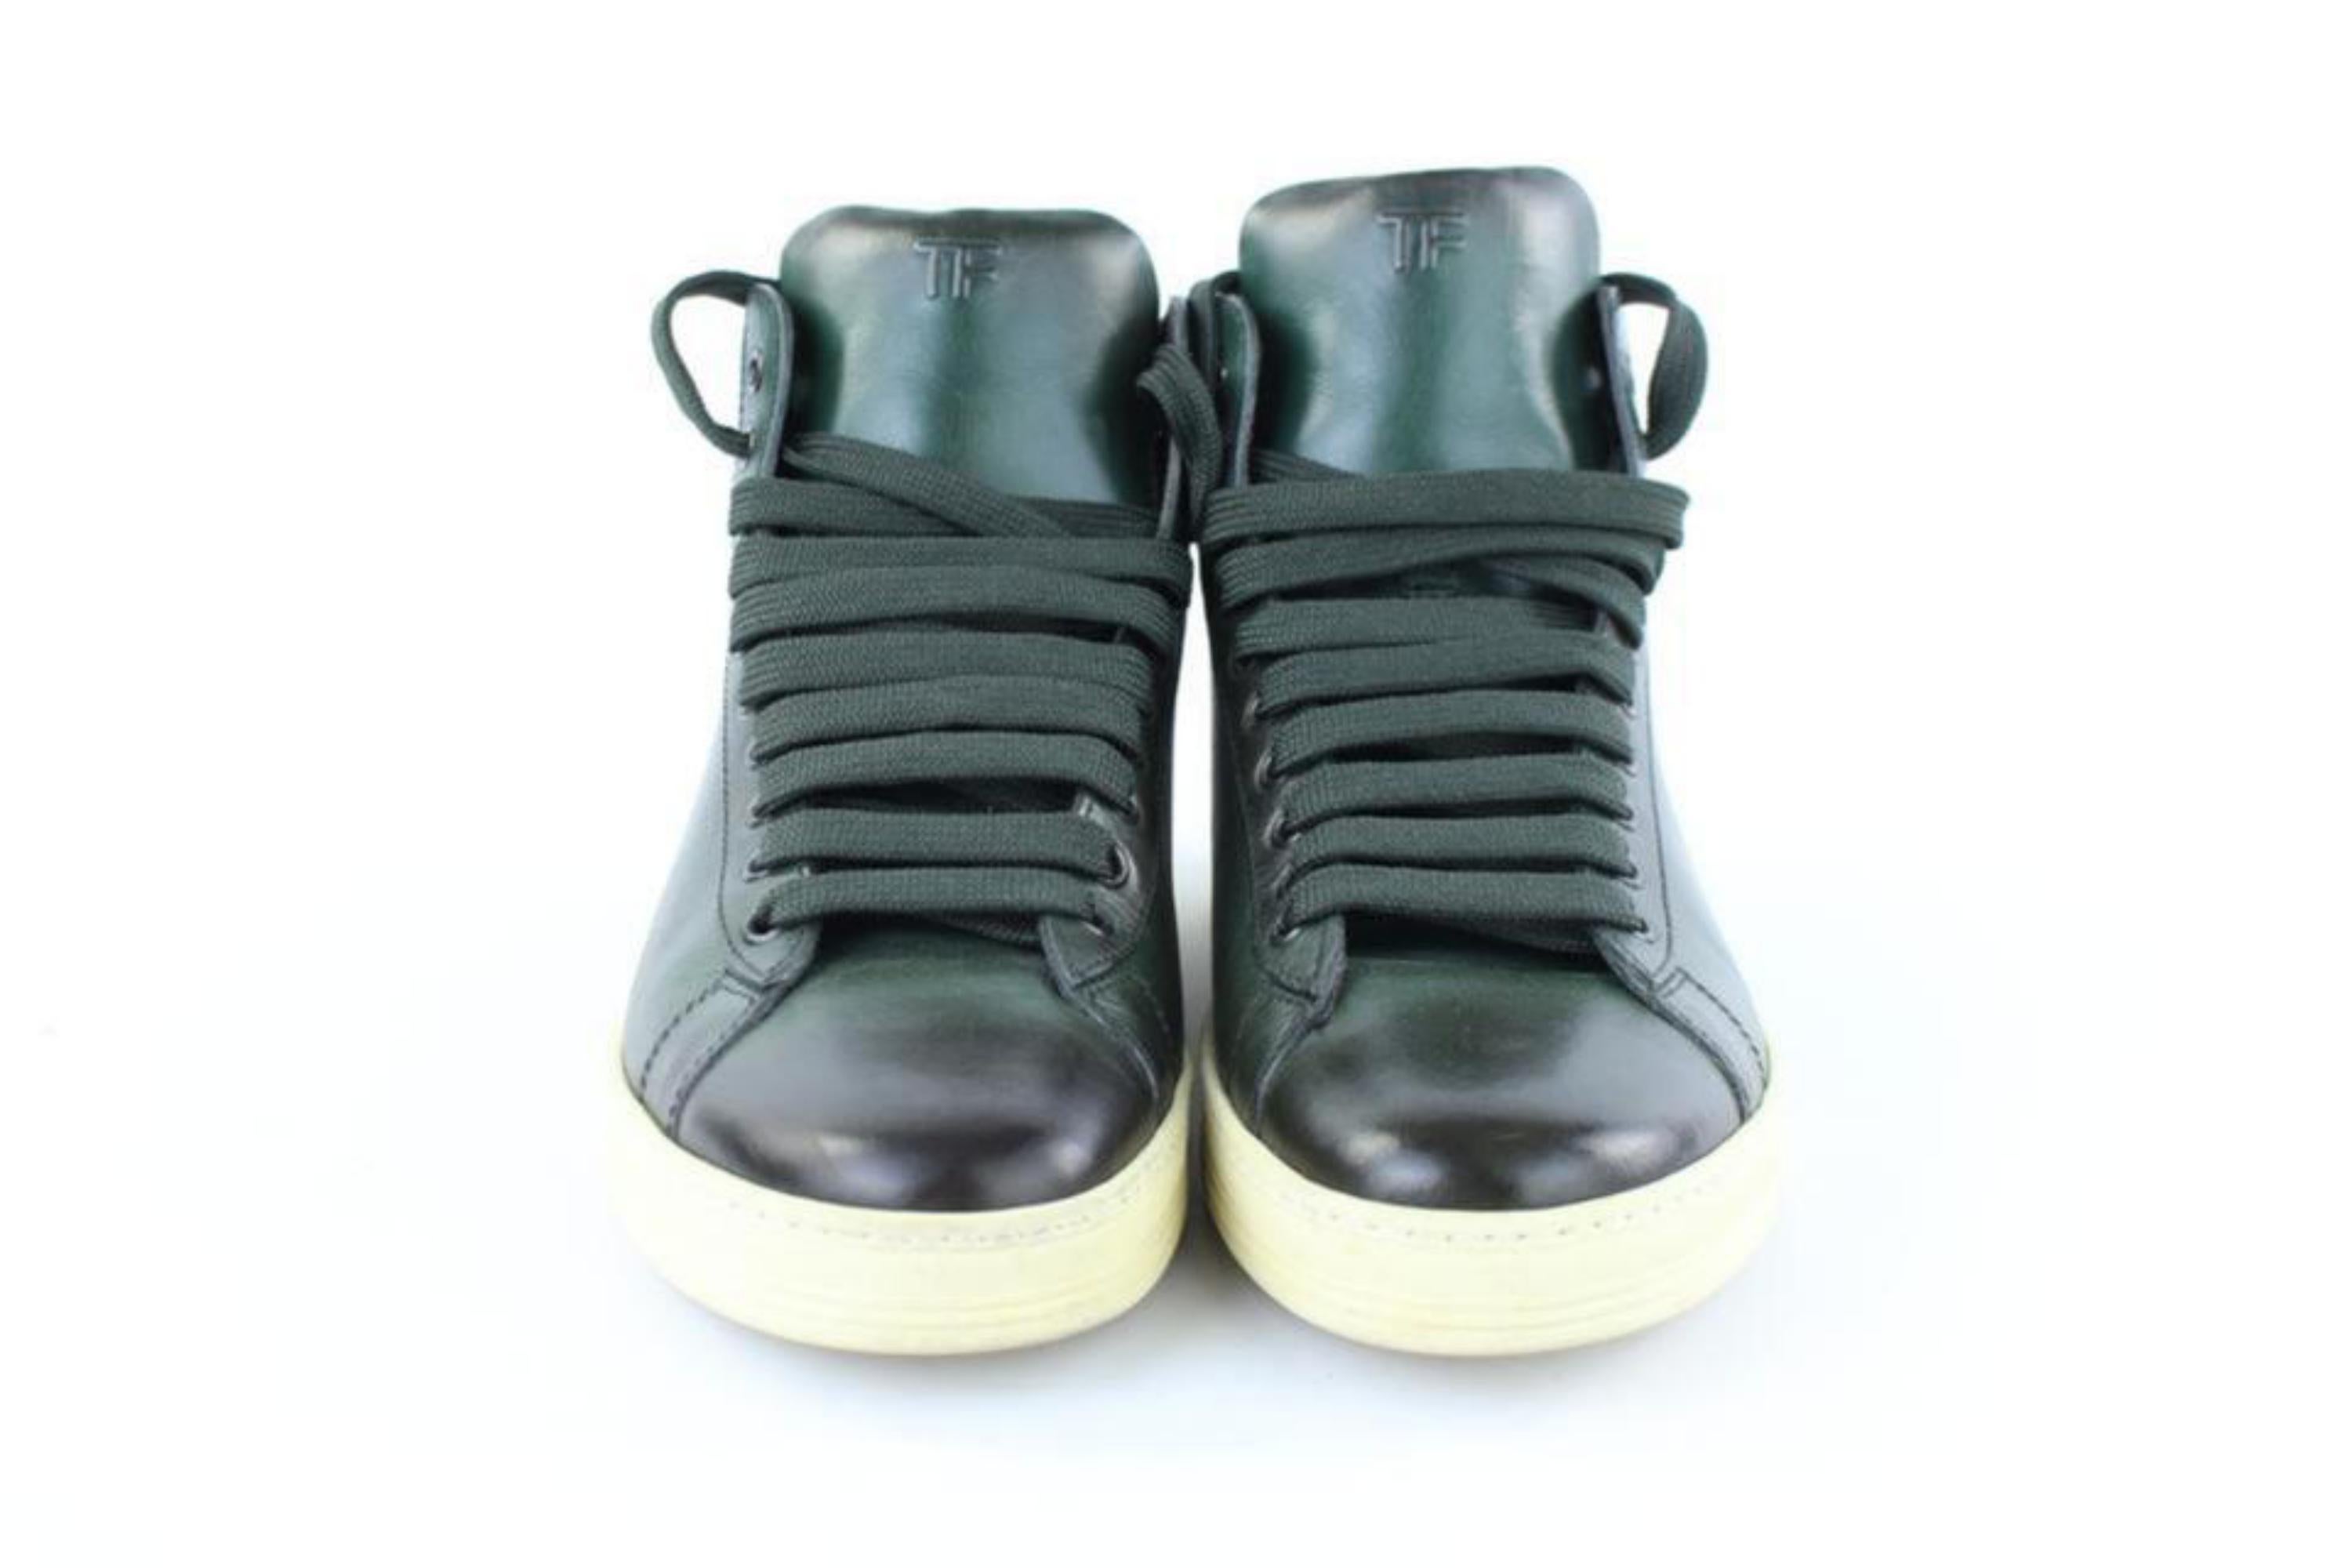 Tom Ford Green Russel Leather High Top Sneaker 2mj1020 Sneakers Boots/Booties For Sale 2